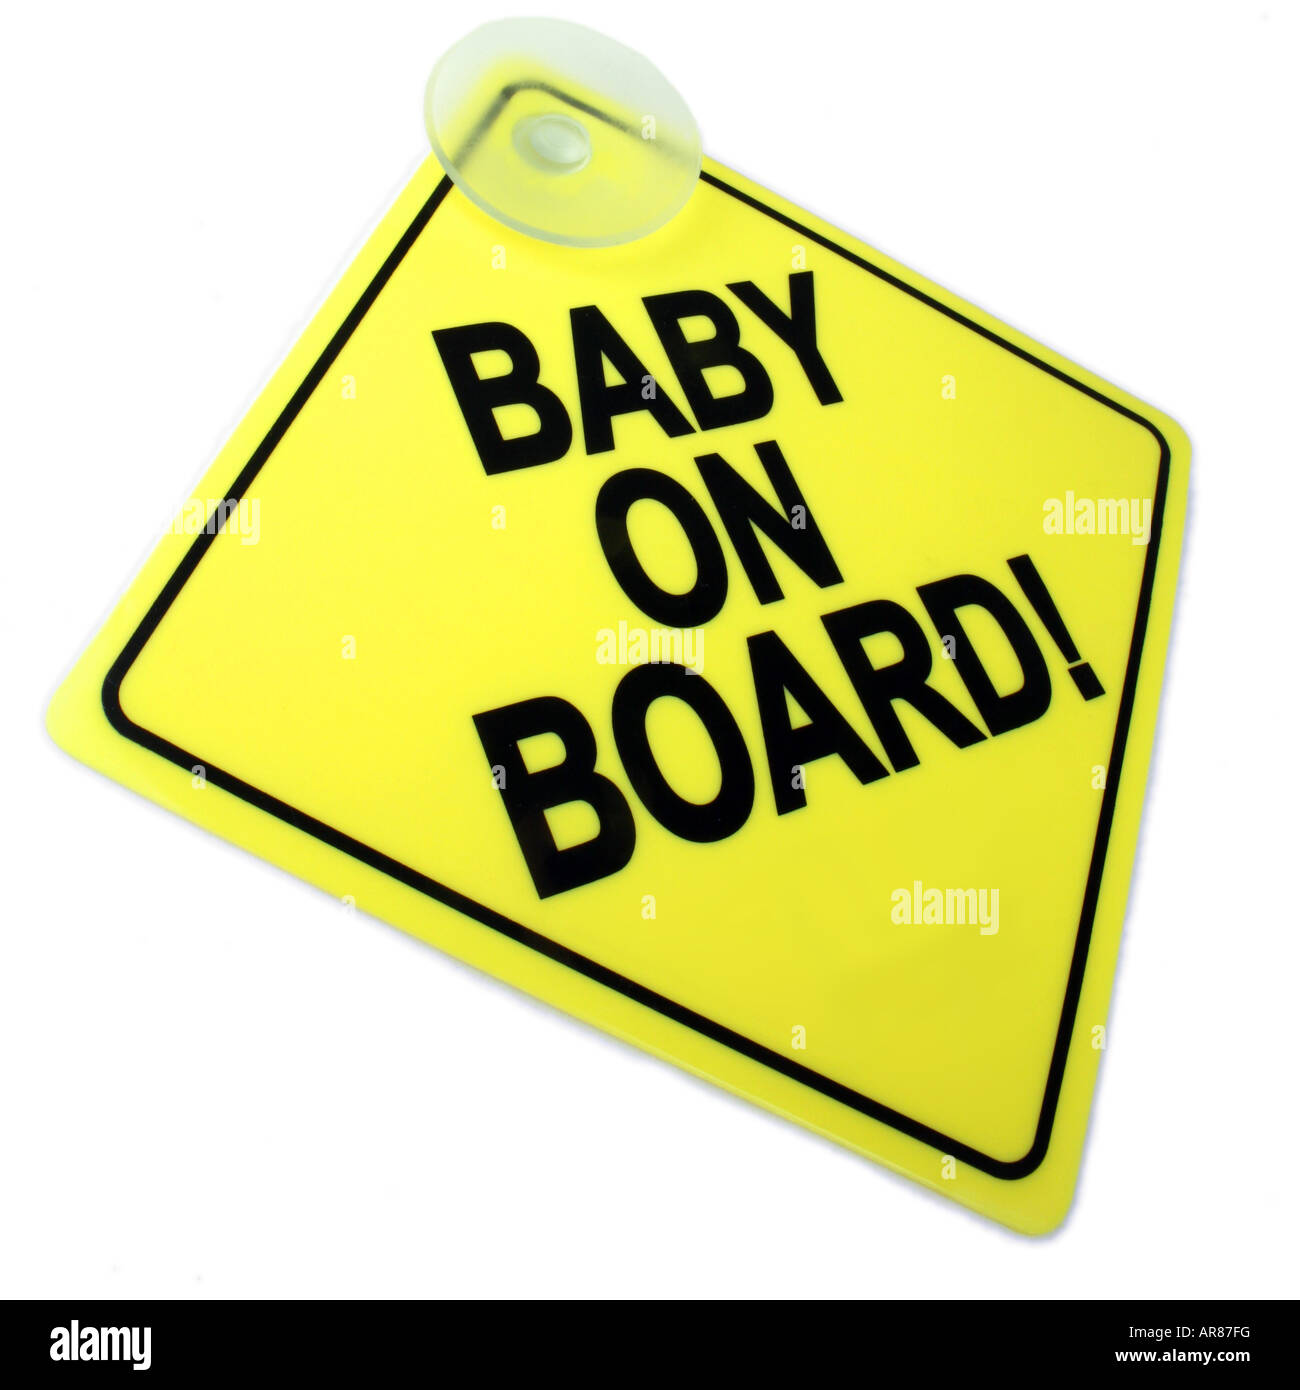 Hot Air Balloon Mamas & Papas Baby On Board Sign Baby Travel Accessory 7542BY400